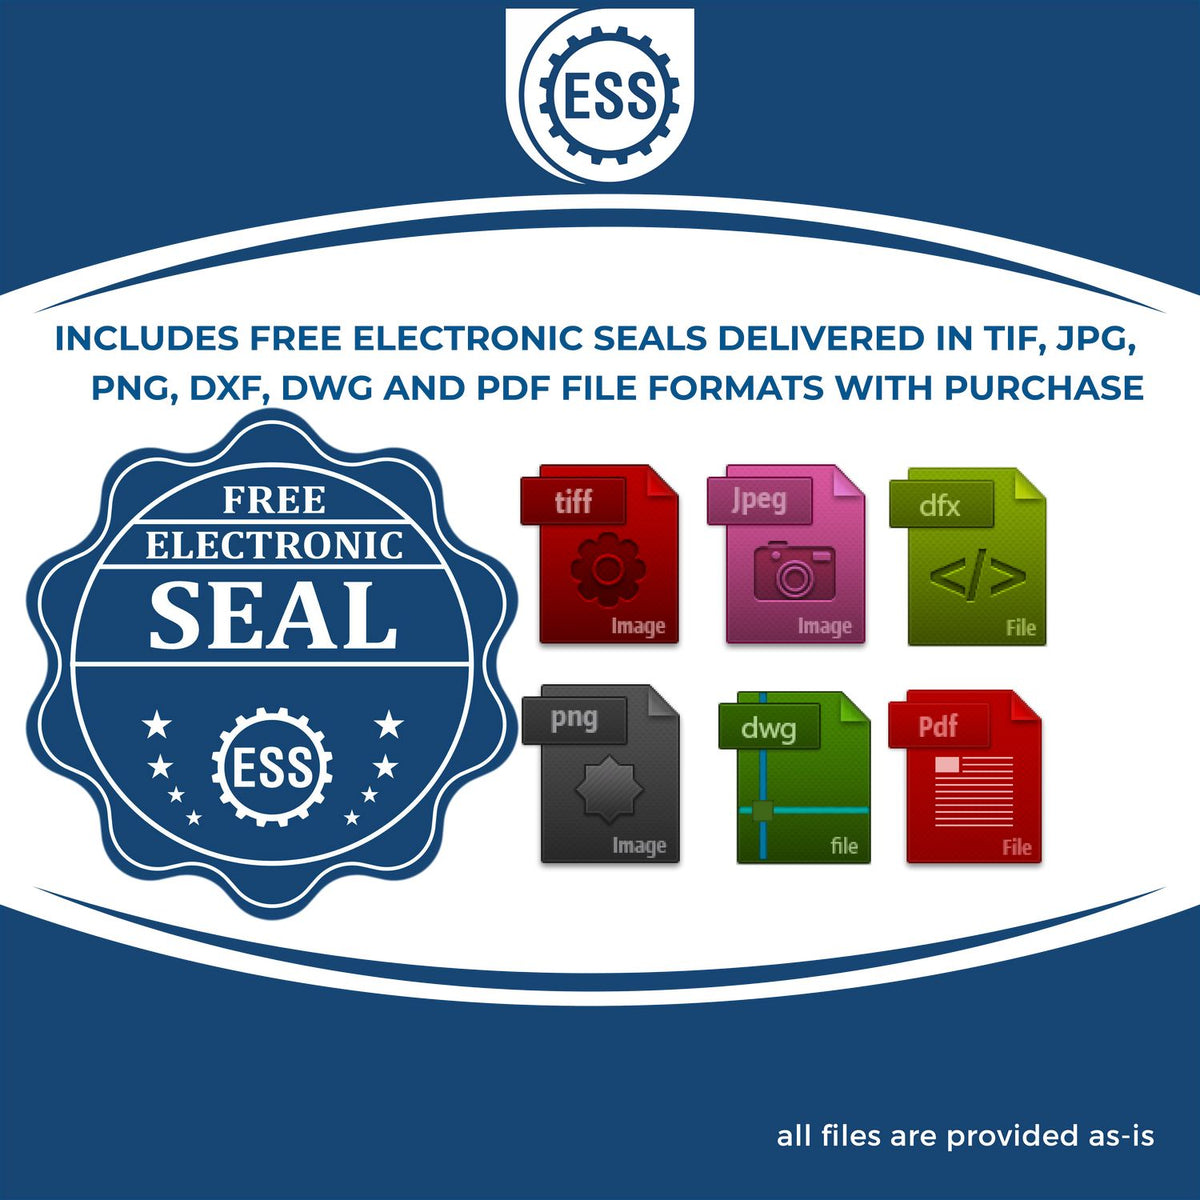 An infographic for the free electronic seal for the Slim Pre-Inked Utah Professional Geologist Seal Stamp illustrating the different file type icons such as DXF, DWG, TIF, JPG and PNG.